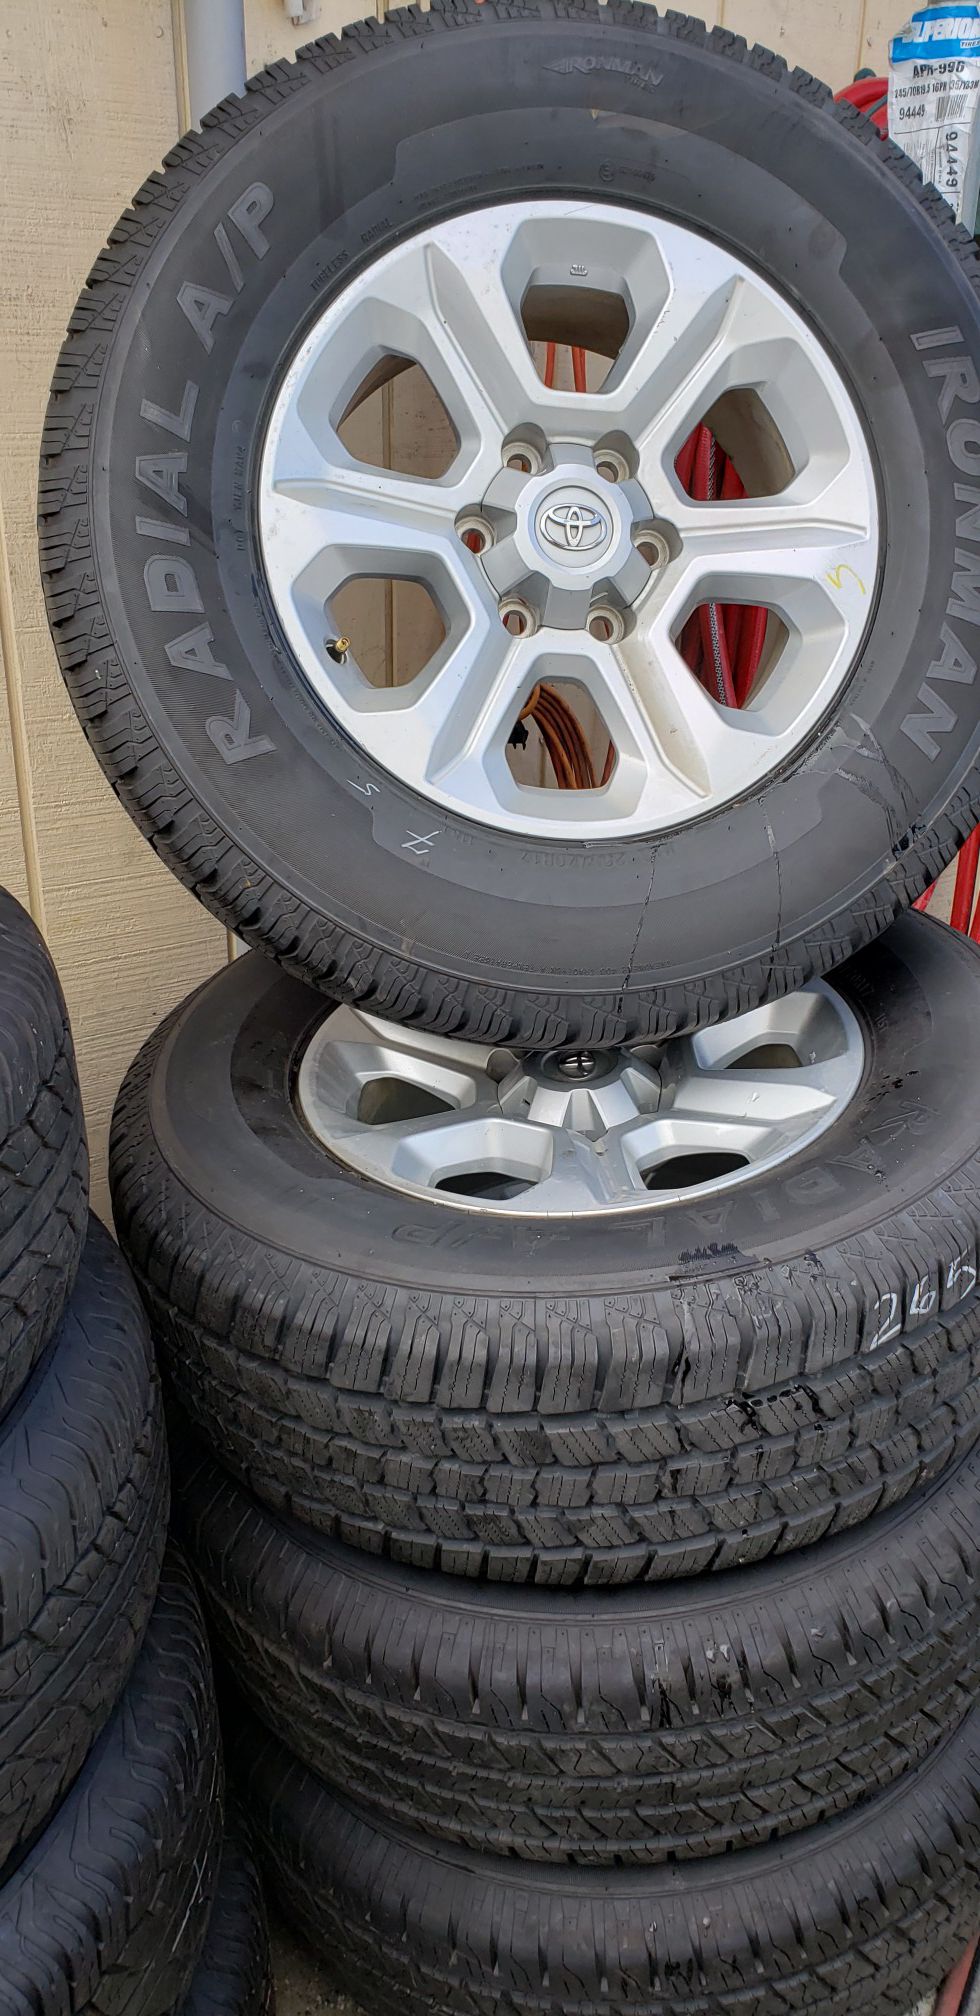 Special deal for the tires and wheels